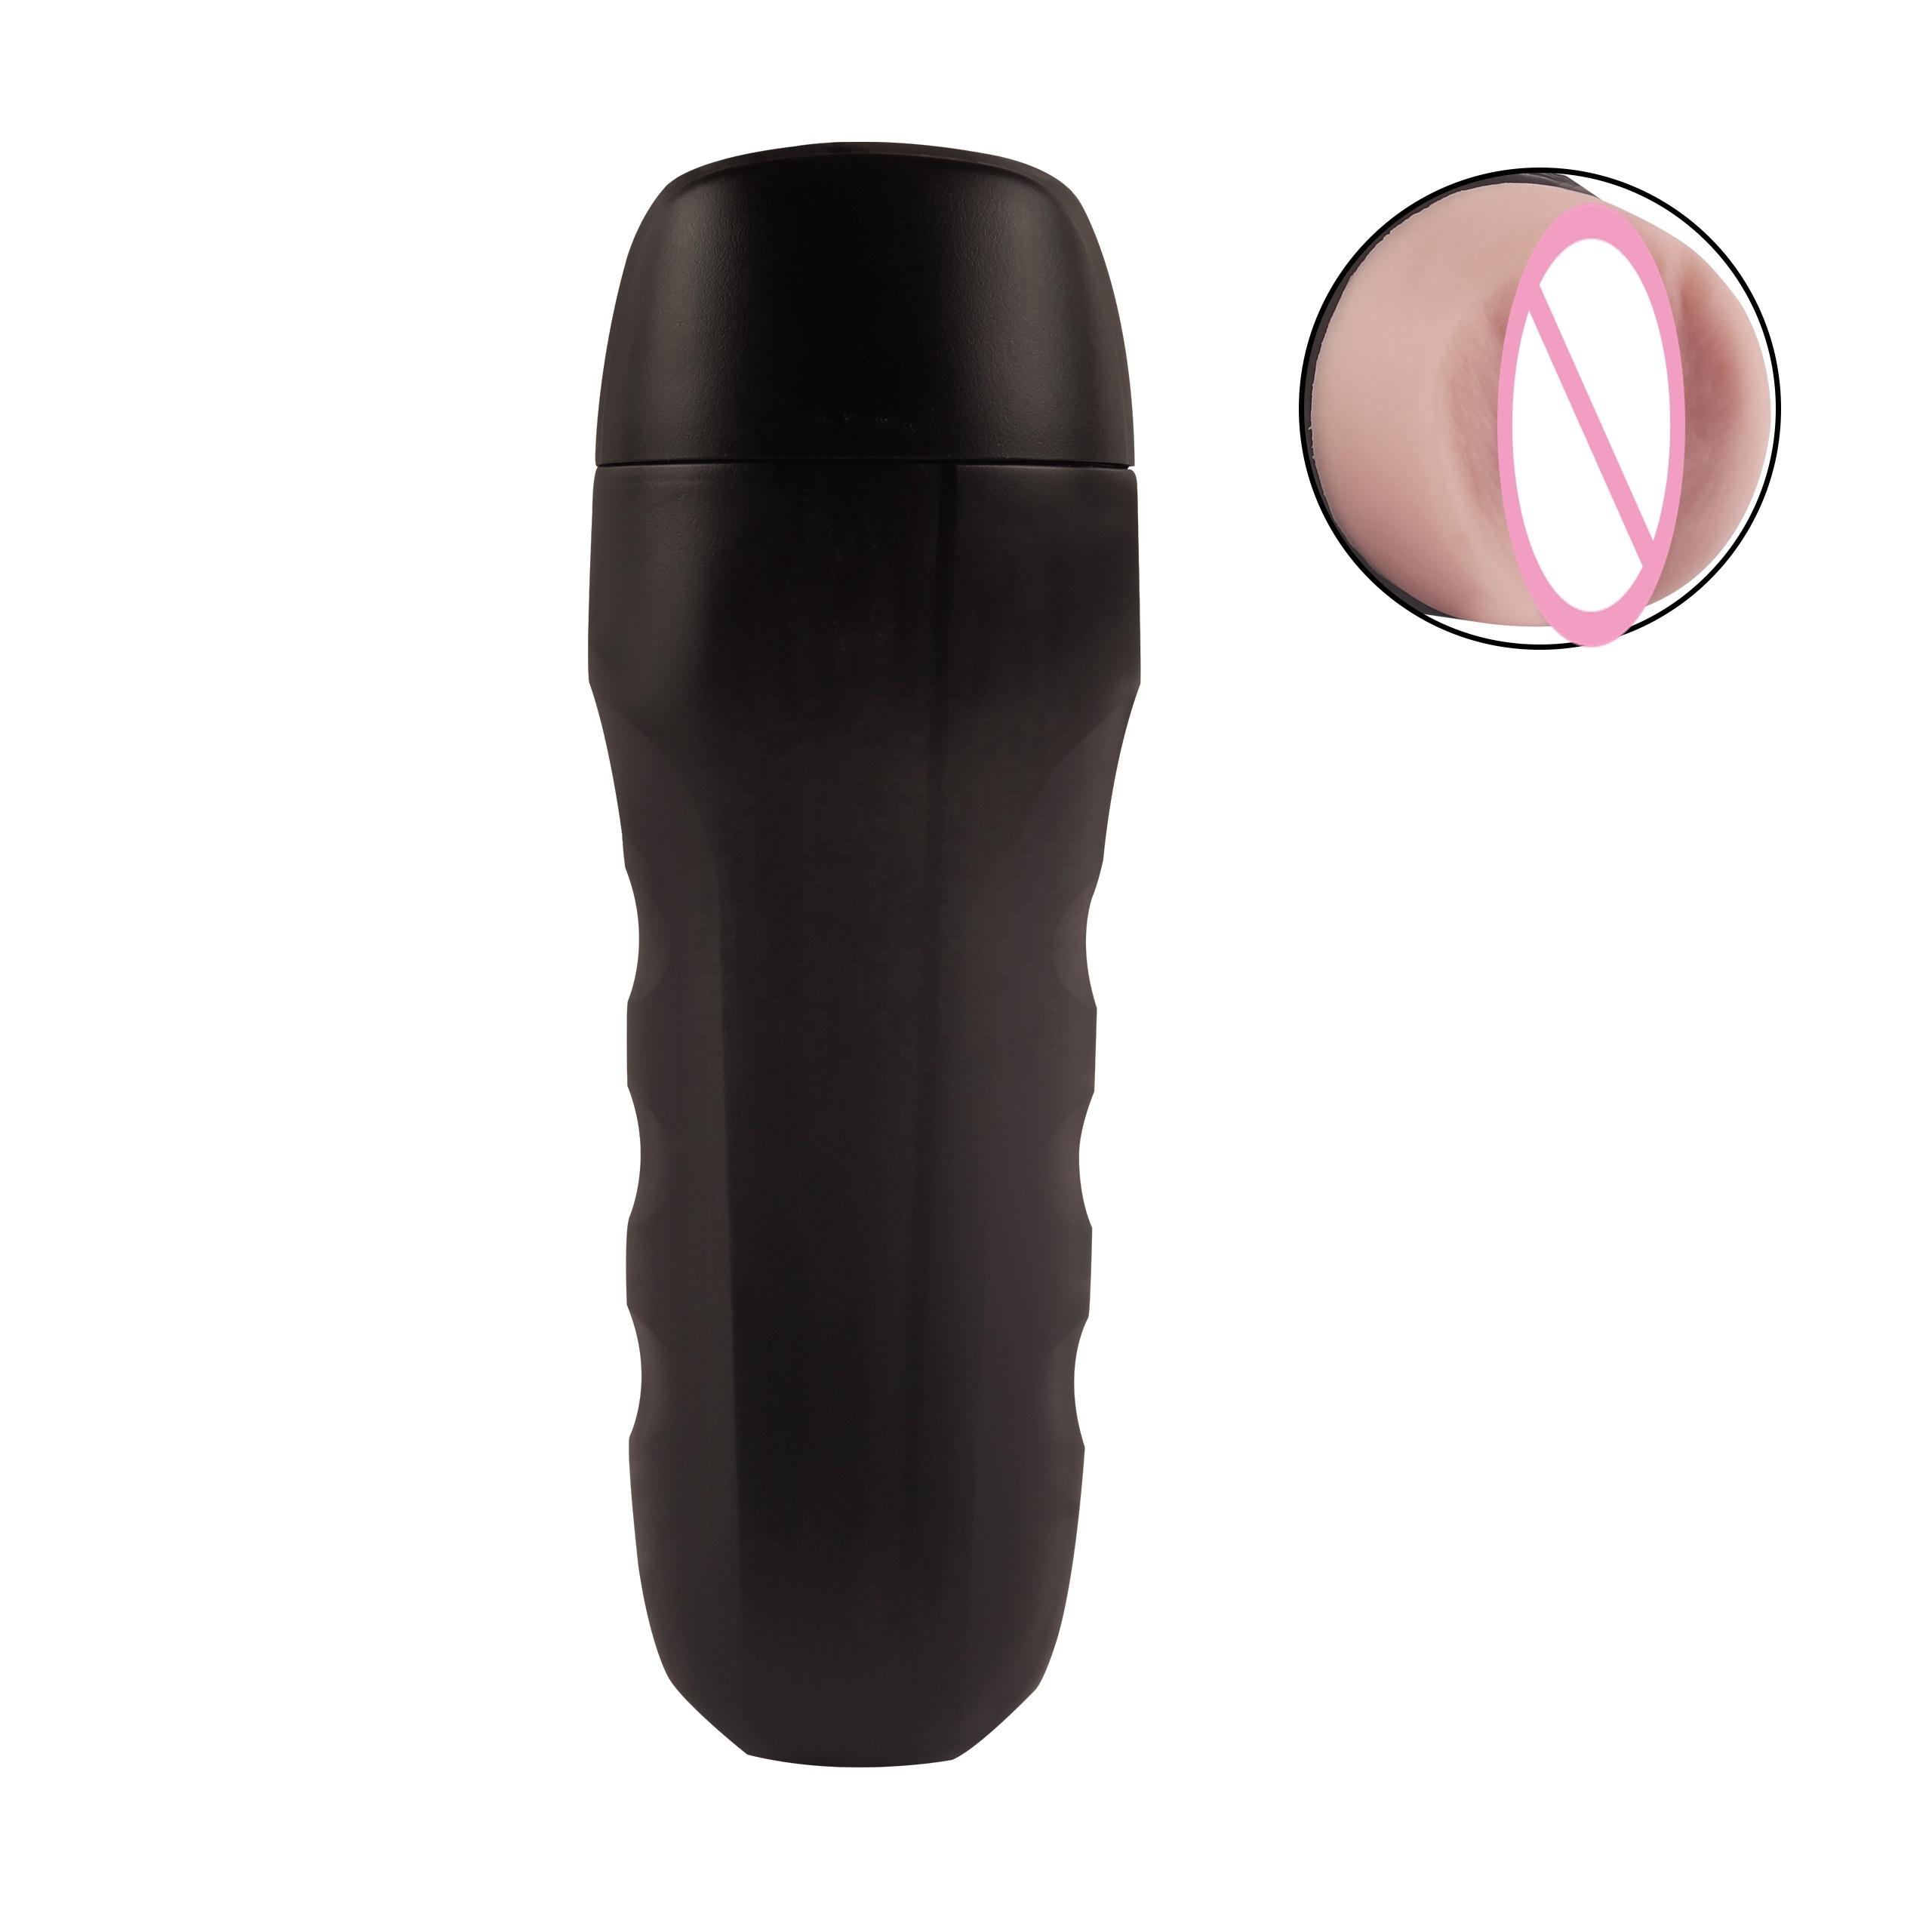  Sex Toys Reality Tender Pussy Stroker For Male Sexual Black Cup Masturbator Penis Stimulation